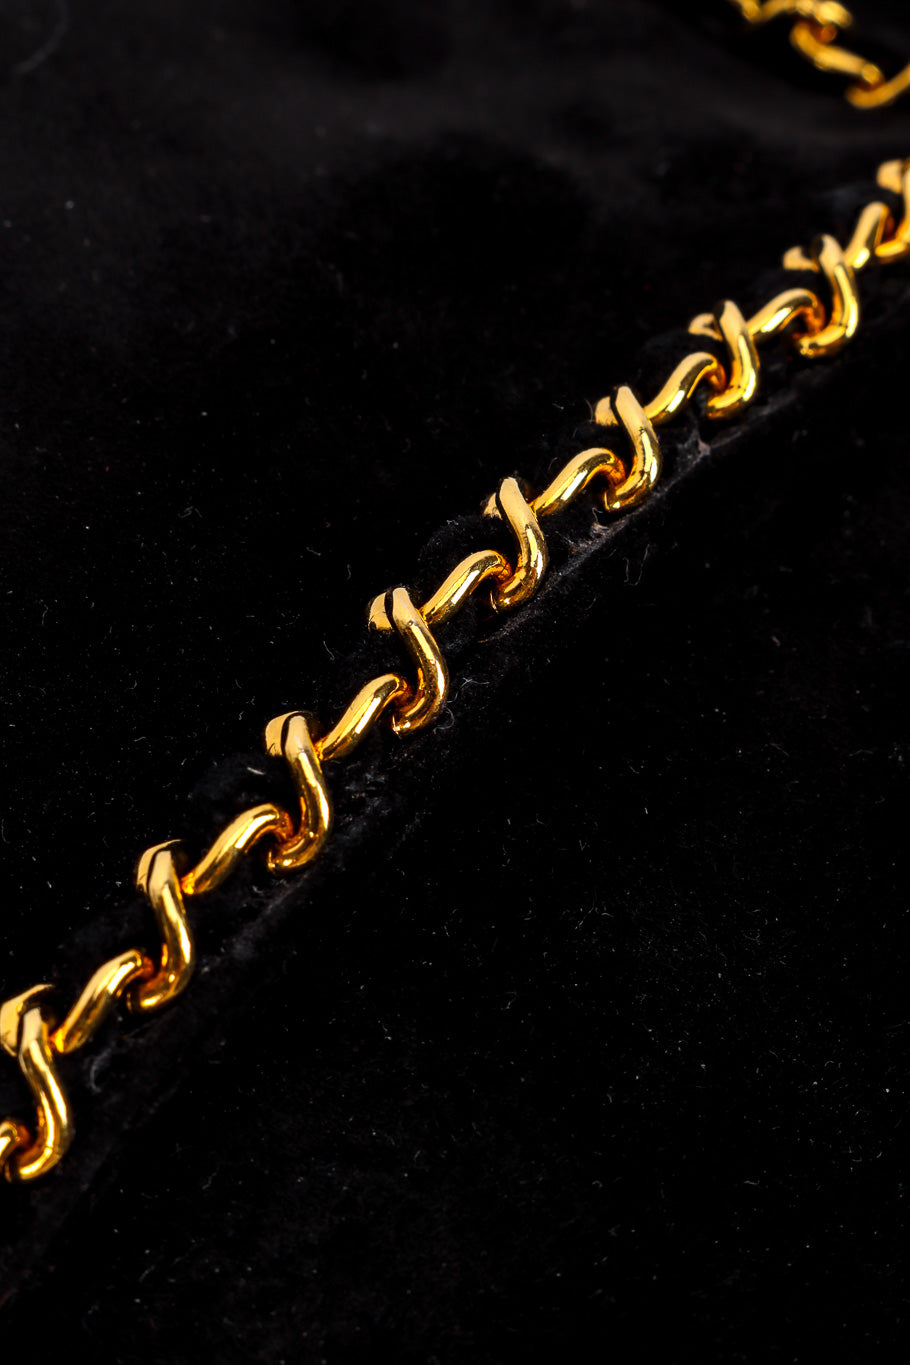 Vintage Chanel Chainlink and Suede Riding Boots chain closeup @recessla